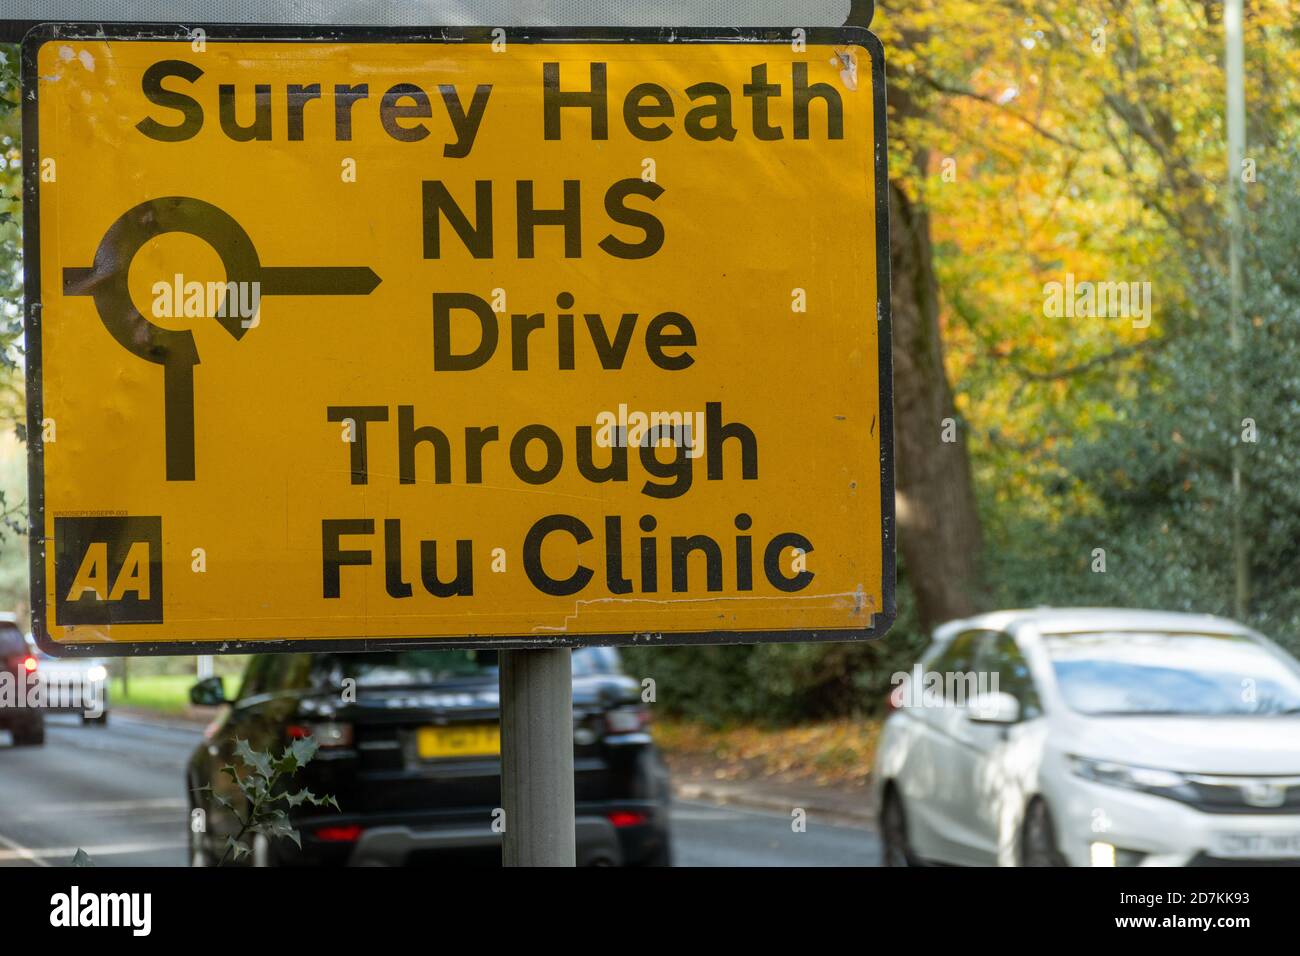 Road sign to an NHS drive through flu clinic providing influenza jabs vaccinations immunizations, Surrey, UK Stock Photo